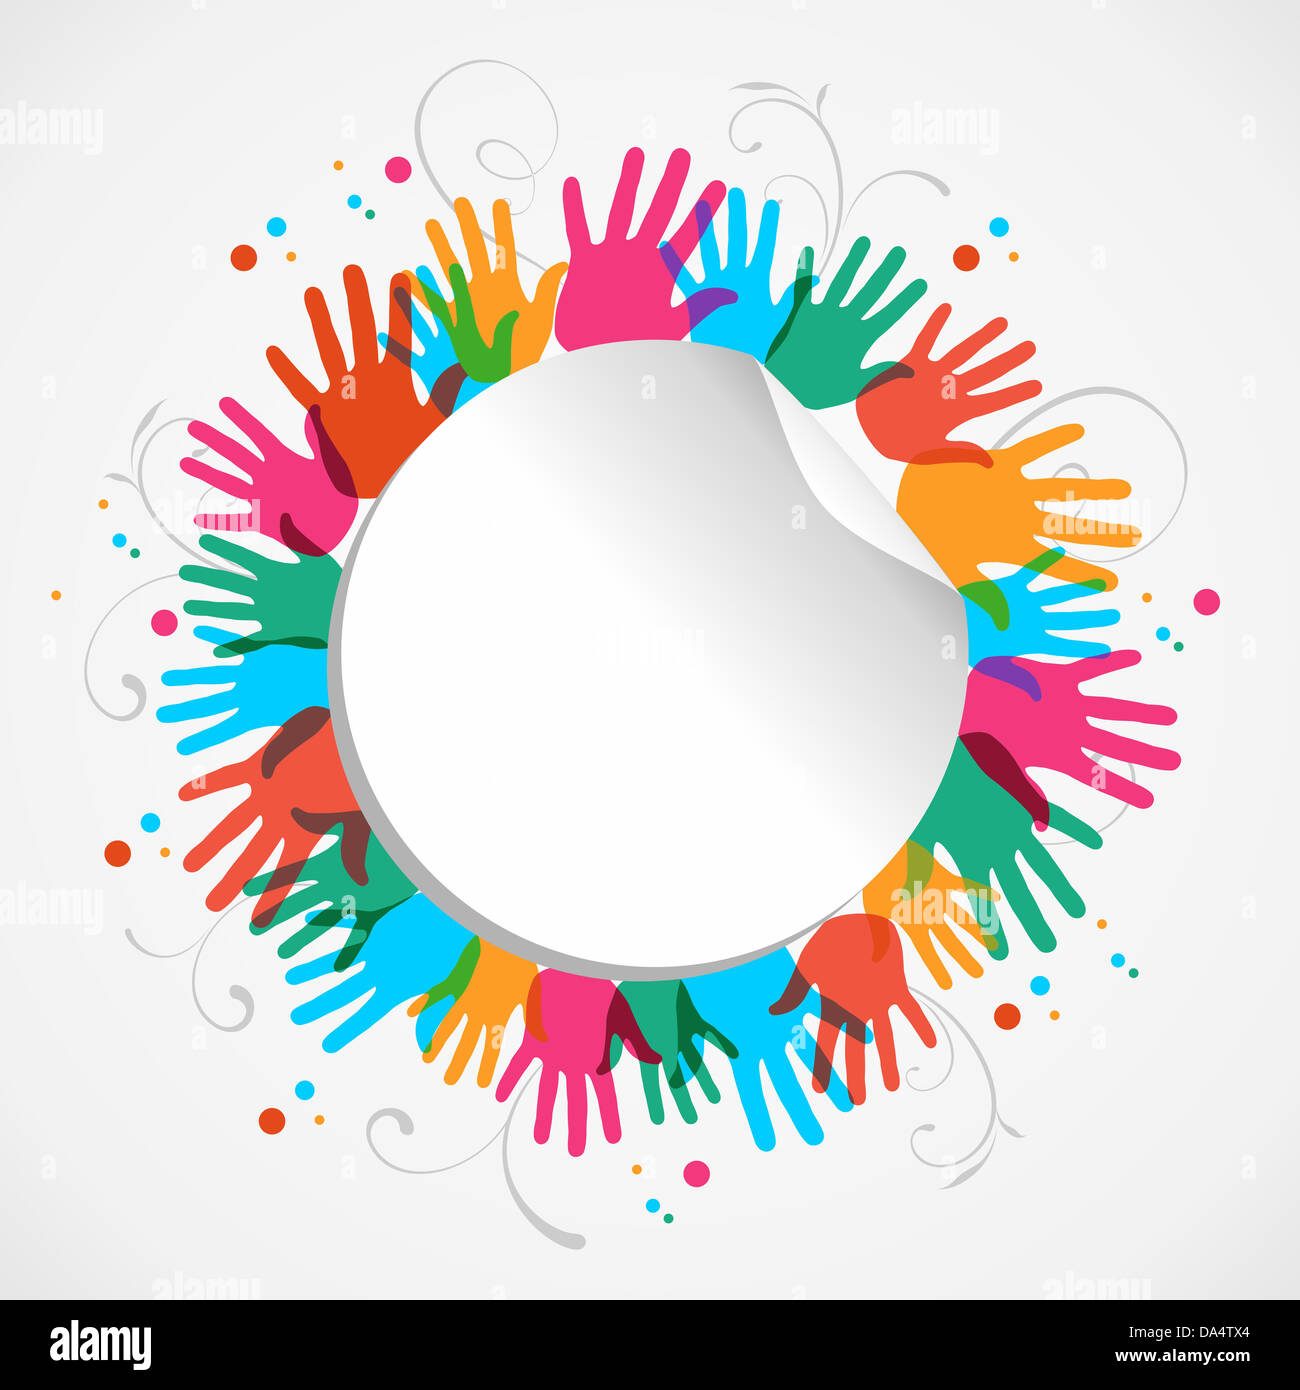 Icon people hand connected, concept illustration background. Vector file layered for easy manipulation and custom coloring. Stock Photo